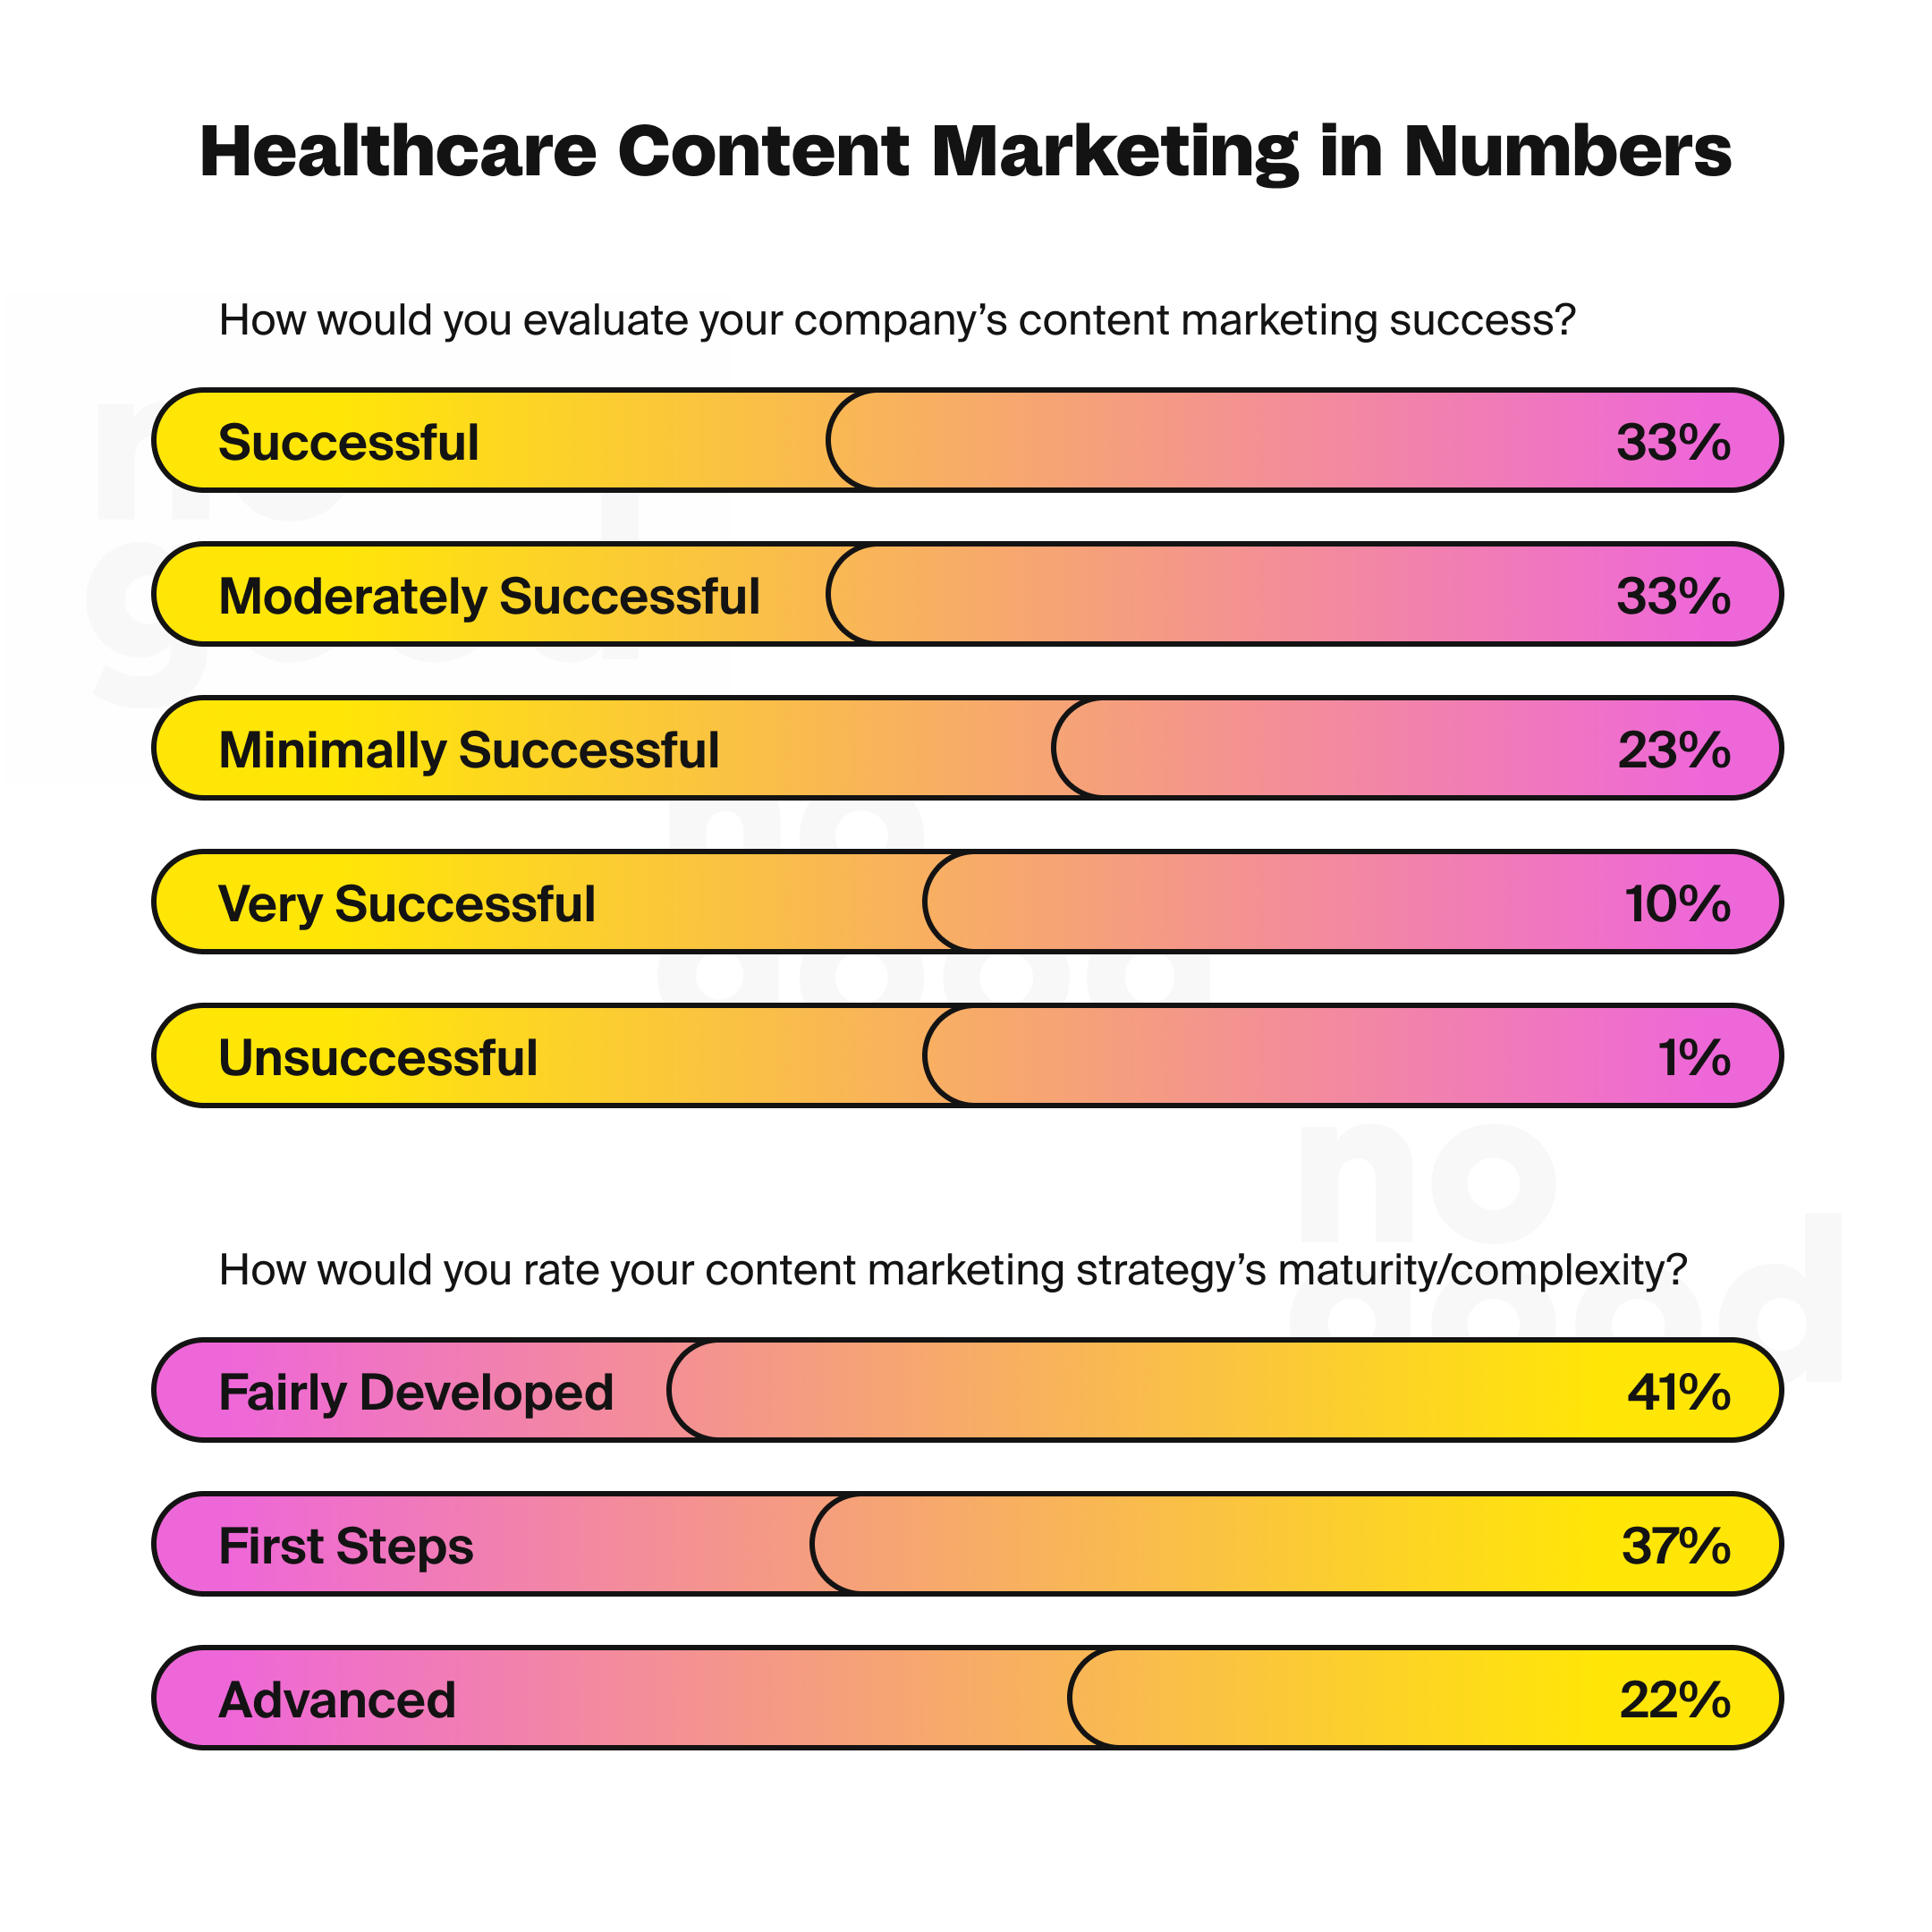 Statistically, marketers are paying close attention to healthcare content marketing to ensure successful strategies. 